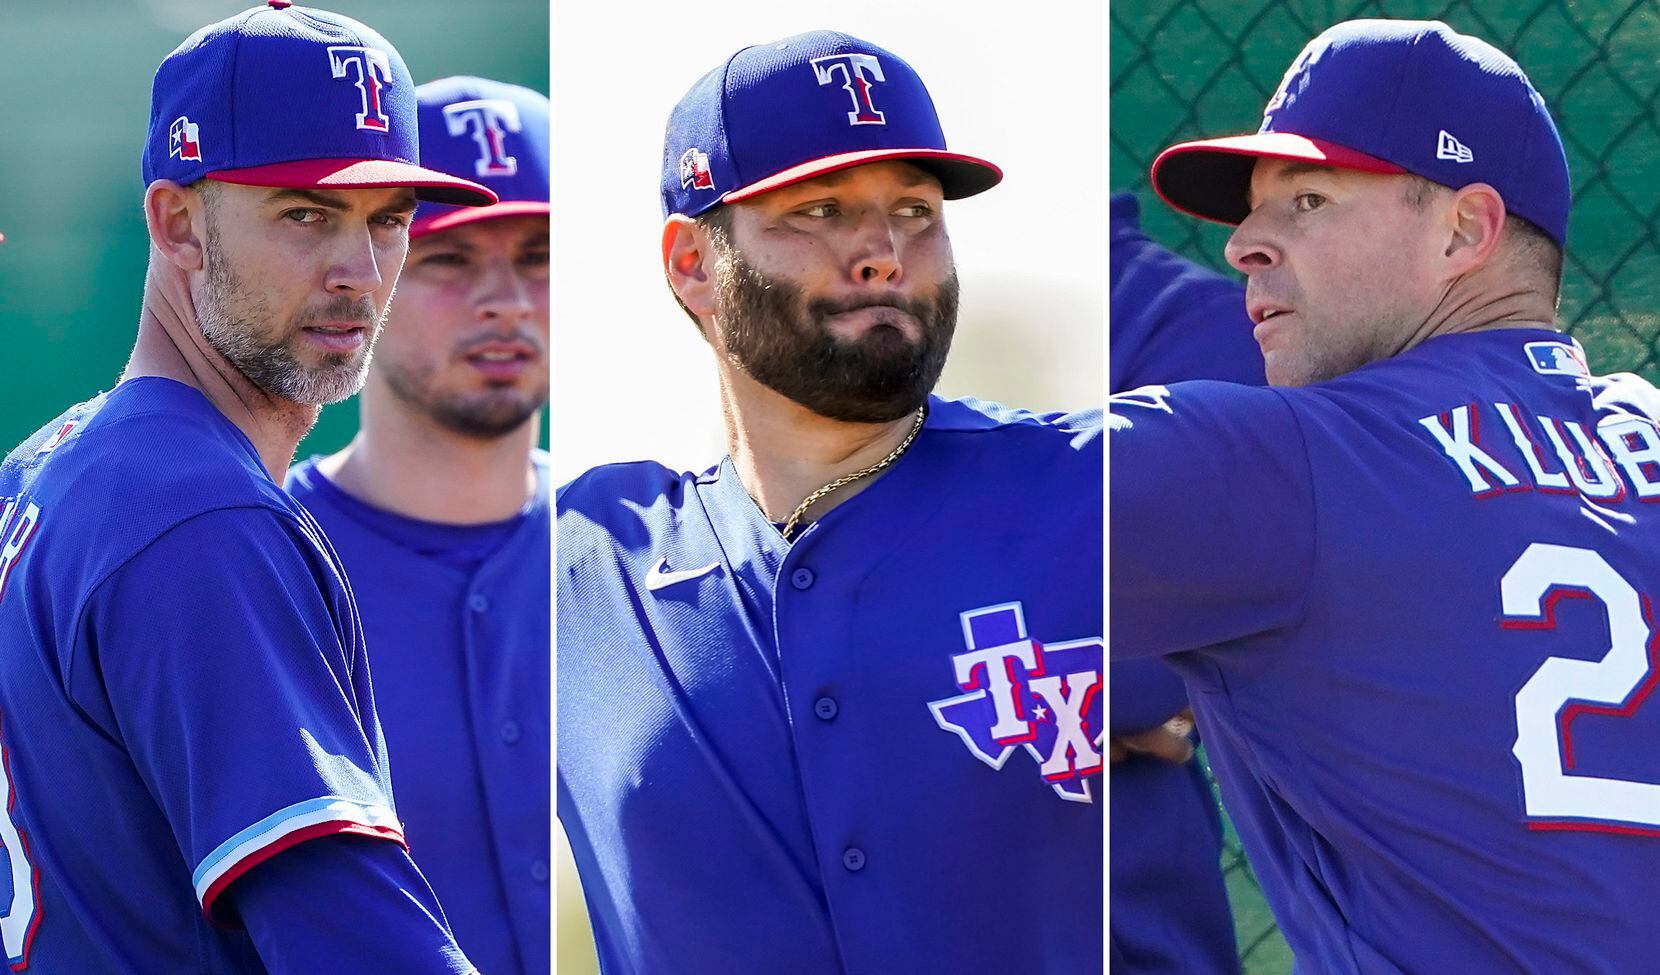 Texas Rangers pitchers Mike Minor, Lance Lynn, and Corey Kluber (L to R) at spring training.